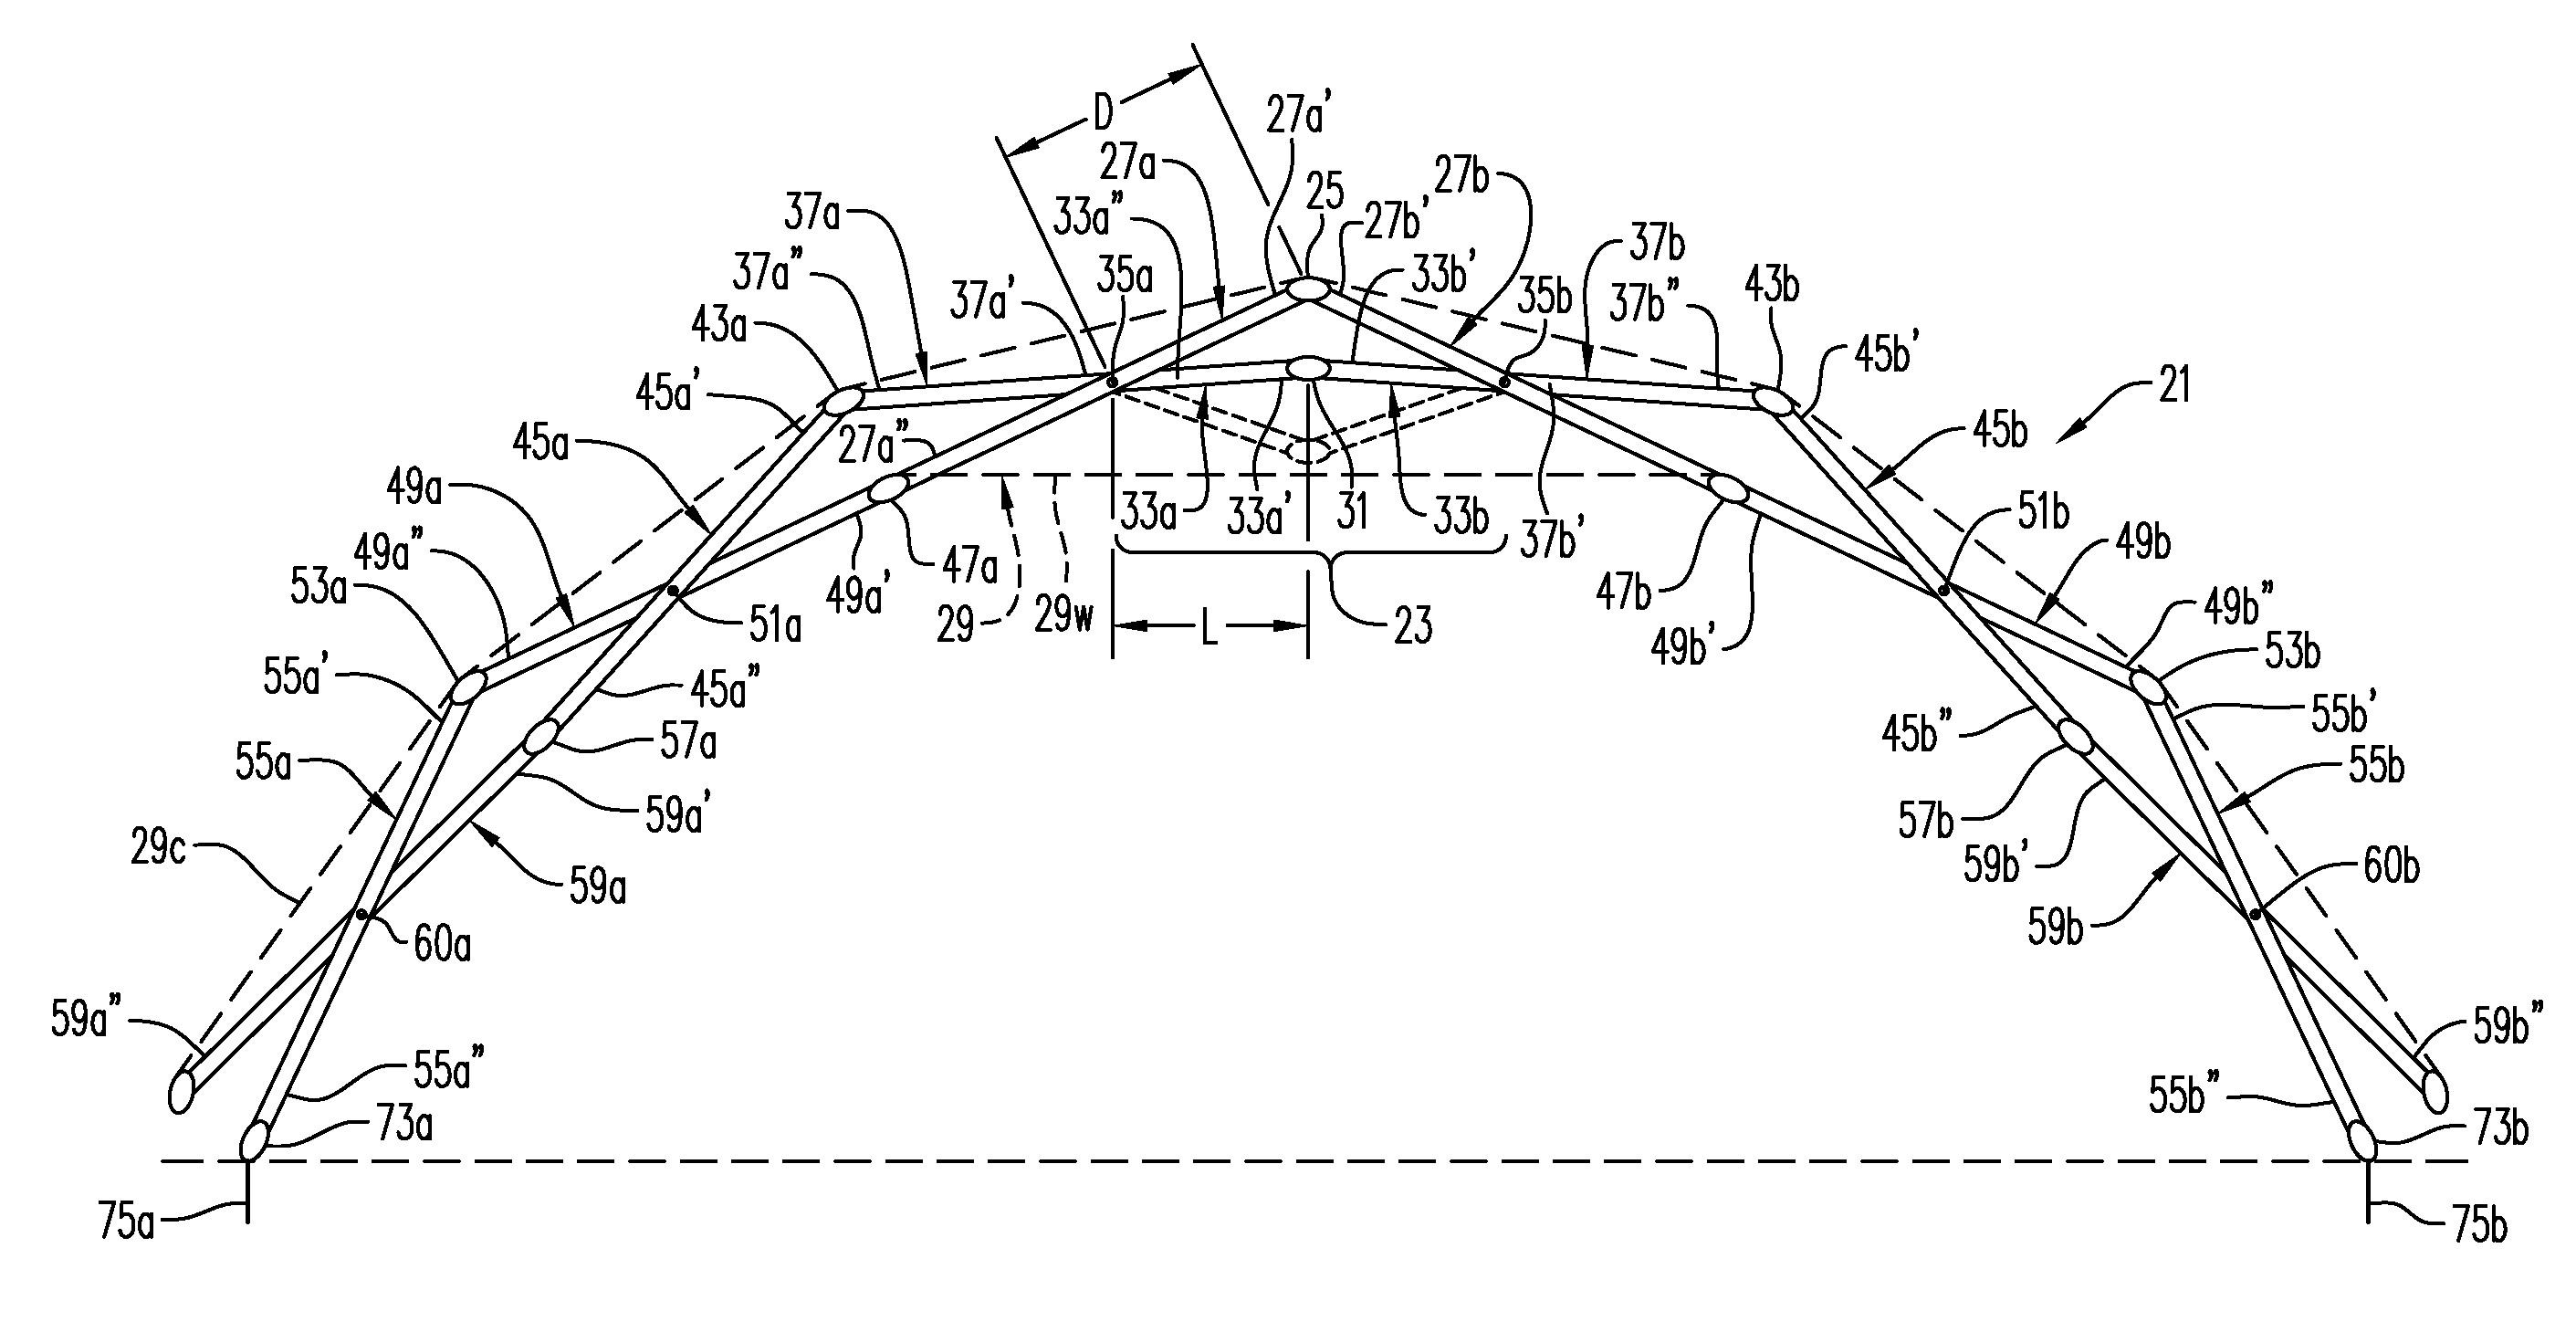 Collapsible structure with self-locking mechanism and method of erecting a collapsible structure